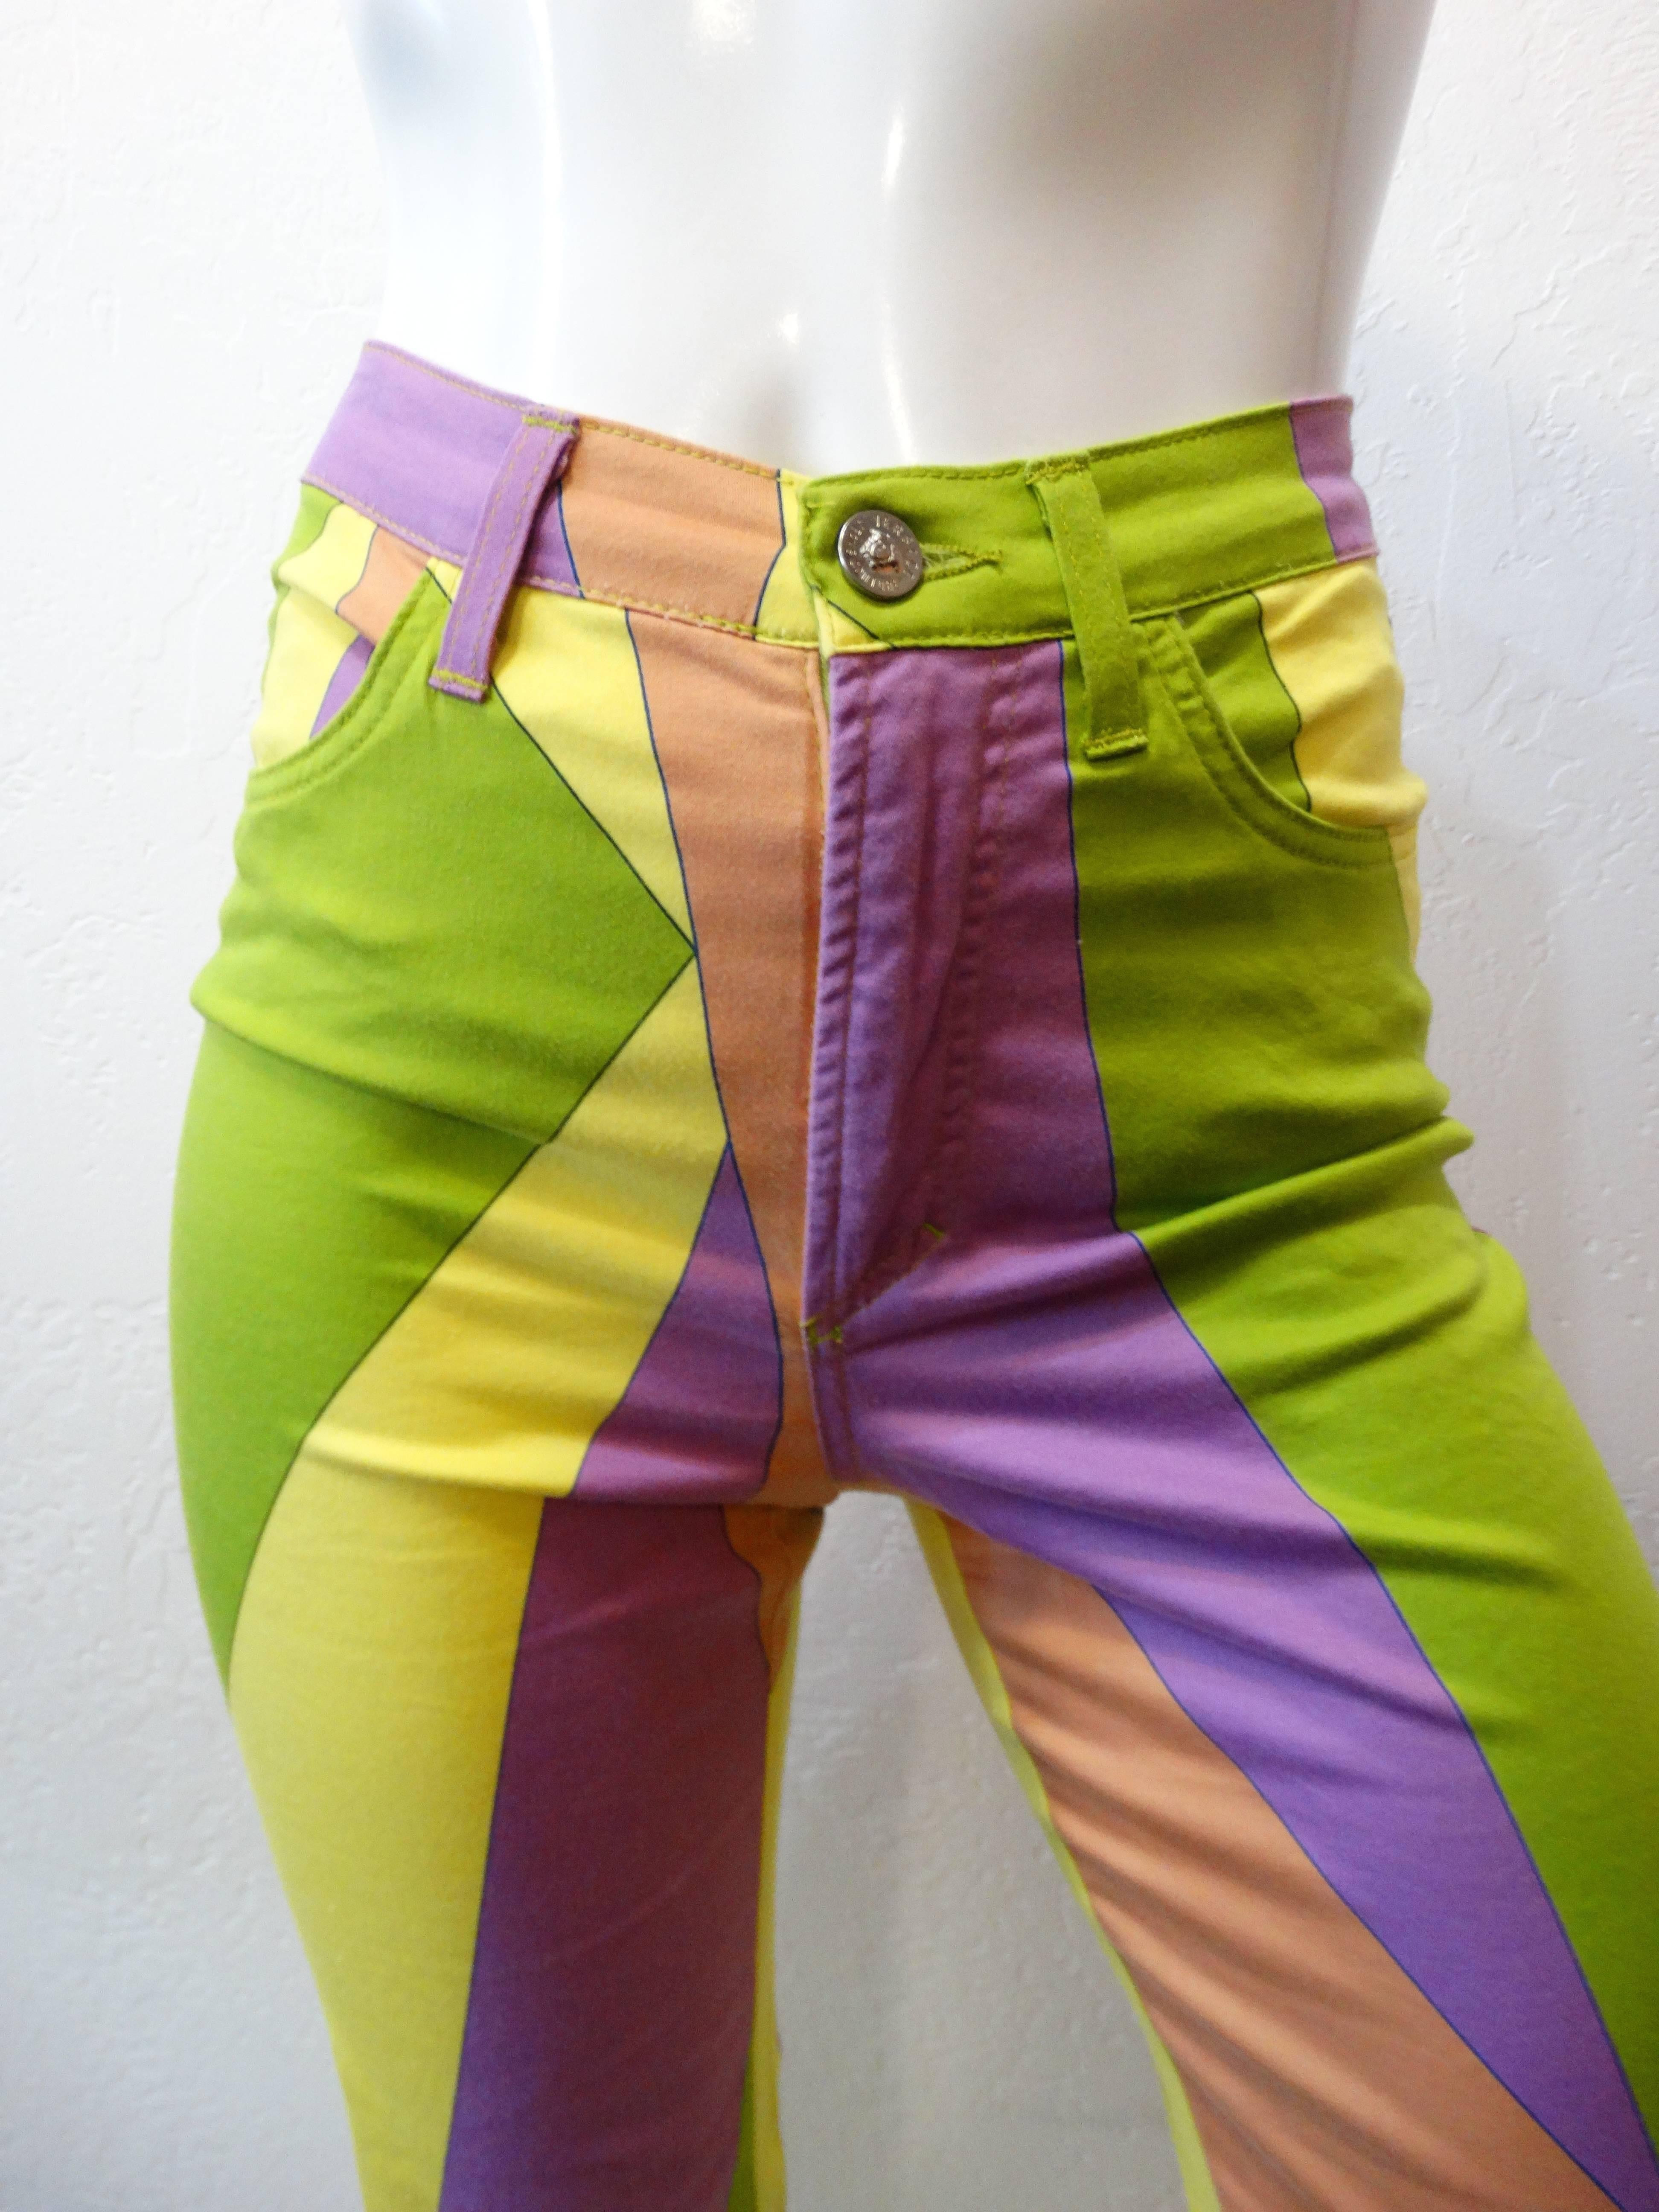 Funk it up in our 1990s Versace geometric printed pants! Yellow, green, peach, and lavender geometric print all over on soft cotton fabric. Jean-like construction,  4 pockets. High rise fit with a slightly tapered leg. Leather Versace patch on the